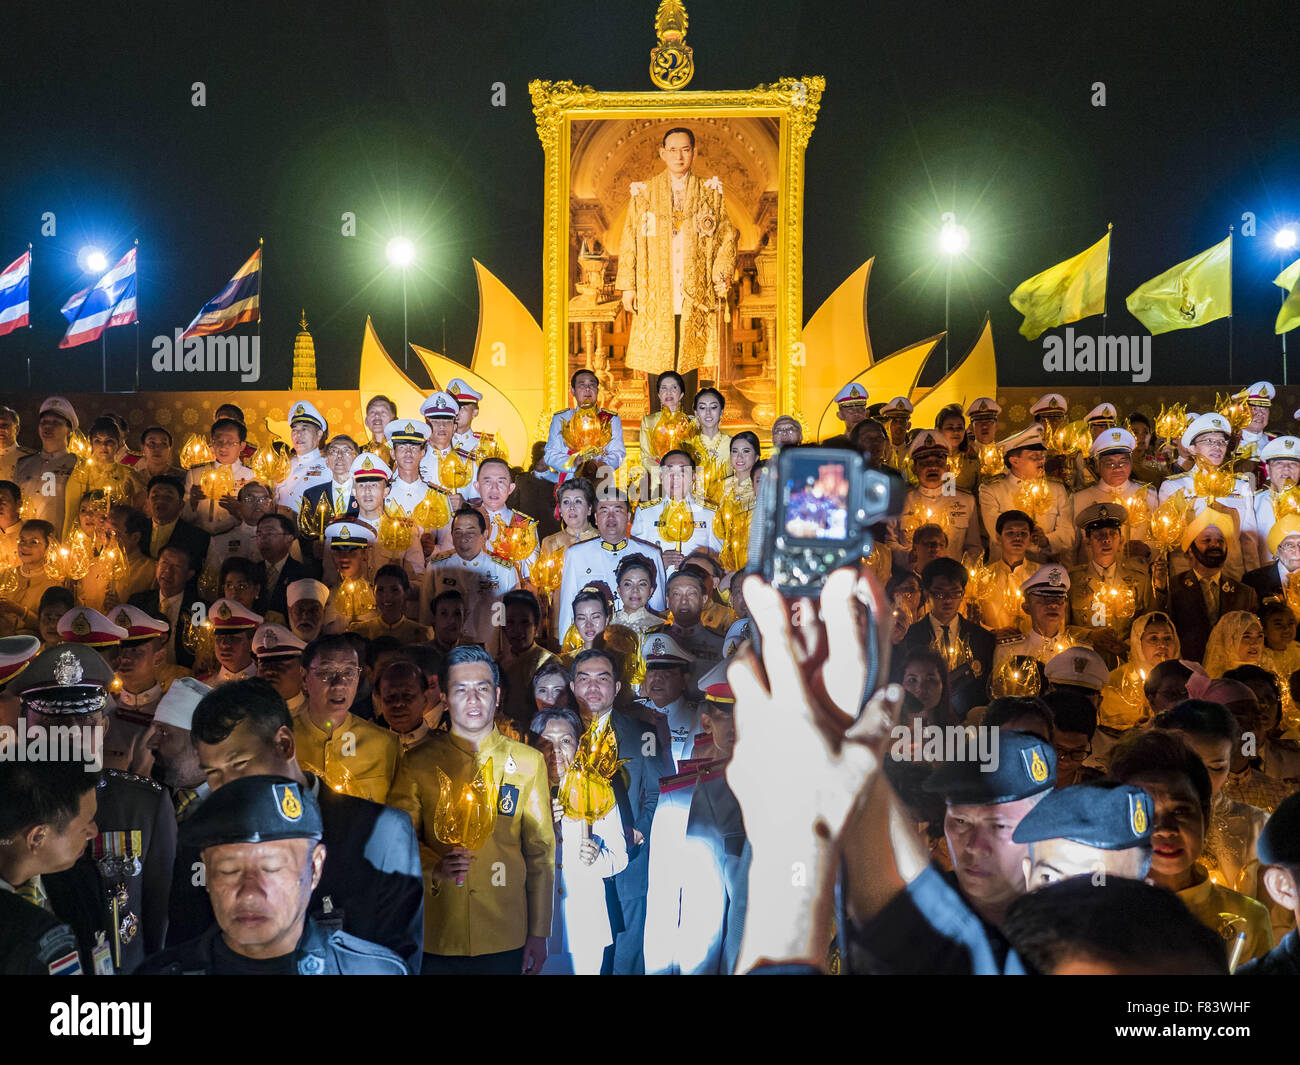 Bangkok, Thailand. 5th Dec, 2015. People hold up lanterns and candles during the celebration of the King's Birthday on Sanam Luang in Bangkok. Thais marked the 88th birthday of Bhumibol Adulyadej, the King of Thailand, Saturday. The King was born on December 5, 1927, in Cambridge, Massachusetts. The family was in the United States because his father, Prince Mahidol, was studying Public Health at Harvard University. He has reigned since 1946 and is the world's currently the longest serving monarch in the world and the longest serving monarch in Thai history. Credit:  ZUMA Press, Inc./Alamy Live Stock Photo